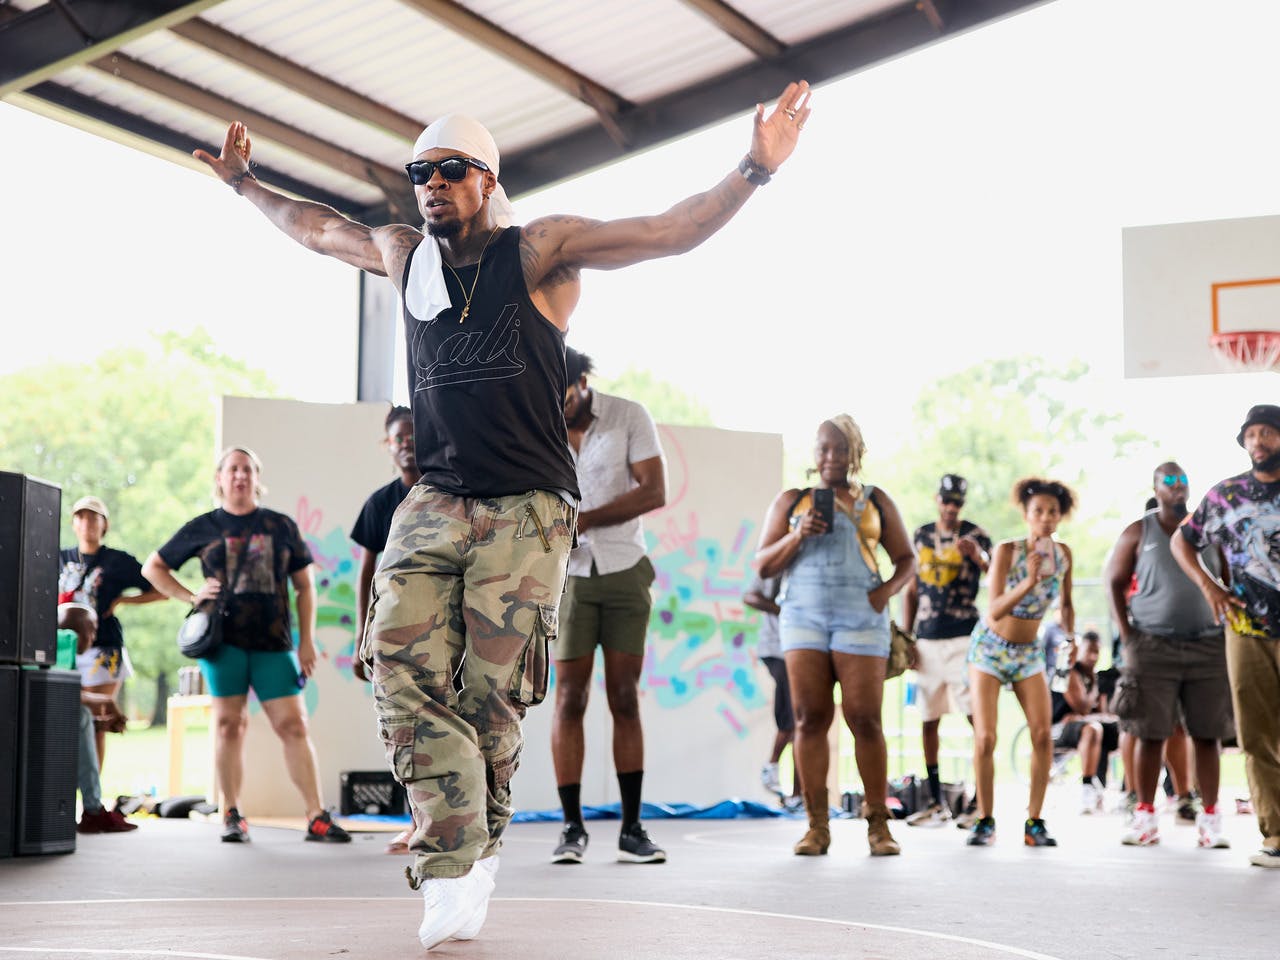 A man dances to hip-hop in front of a crowd.